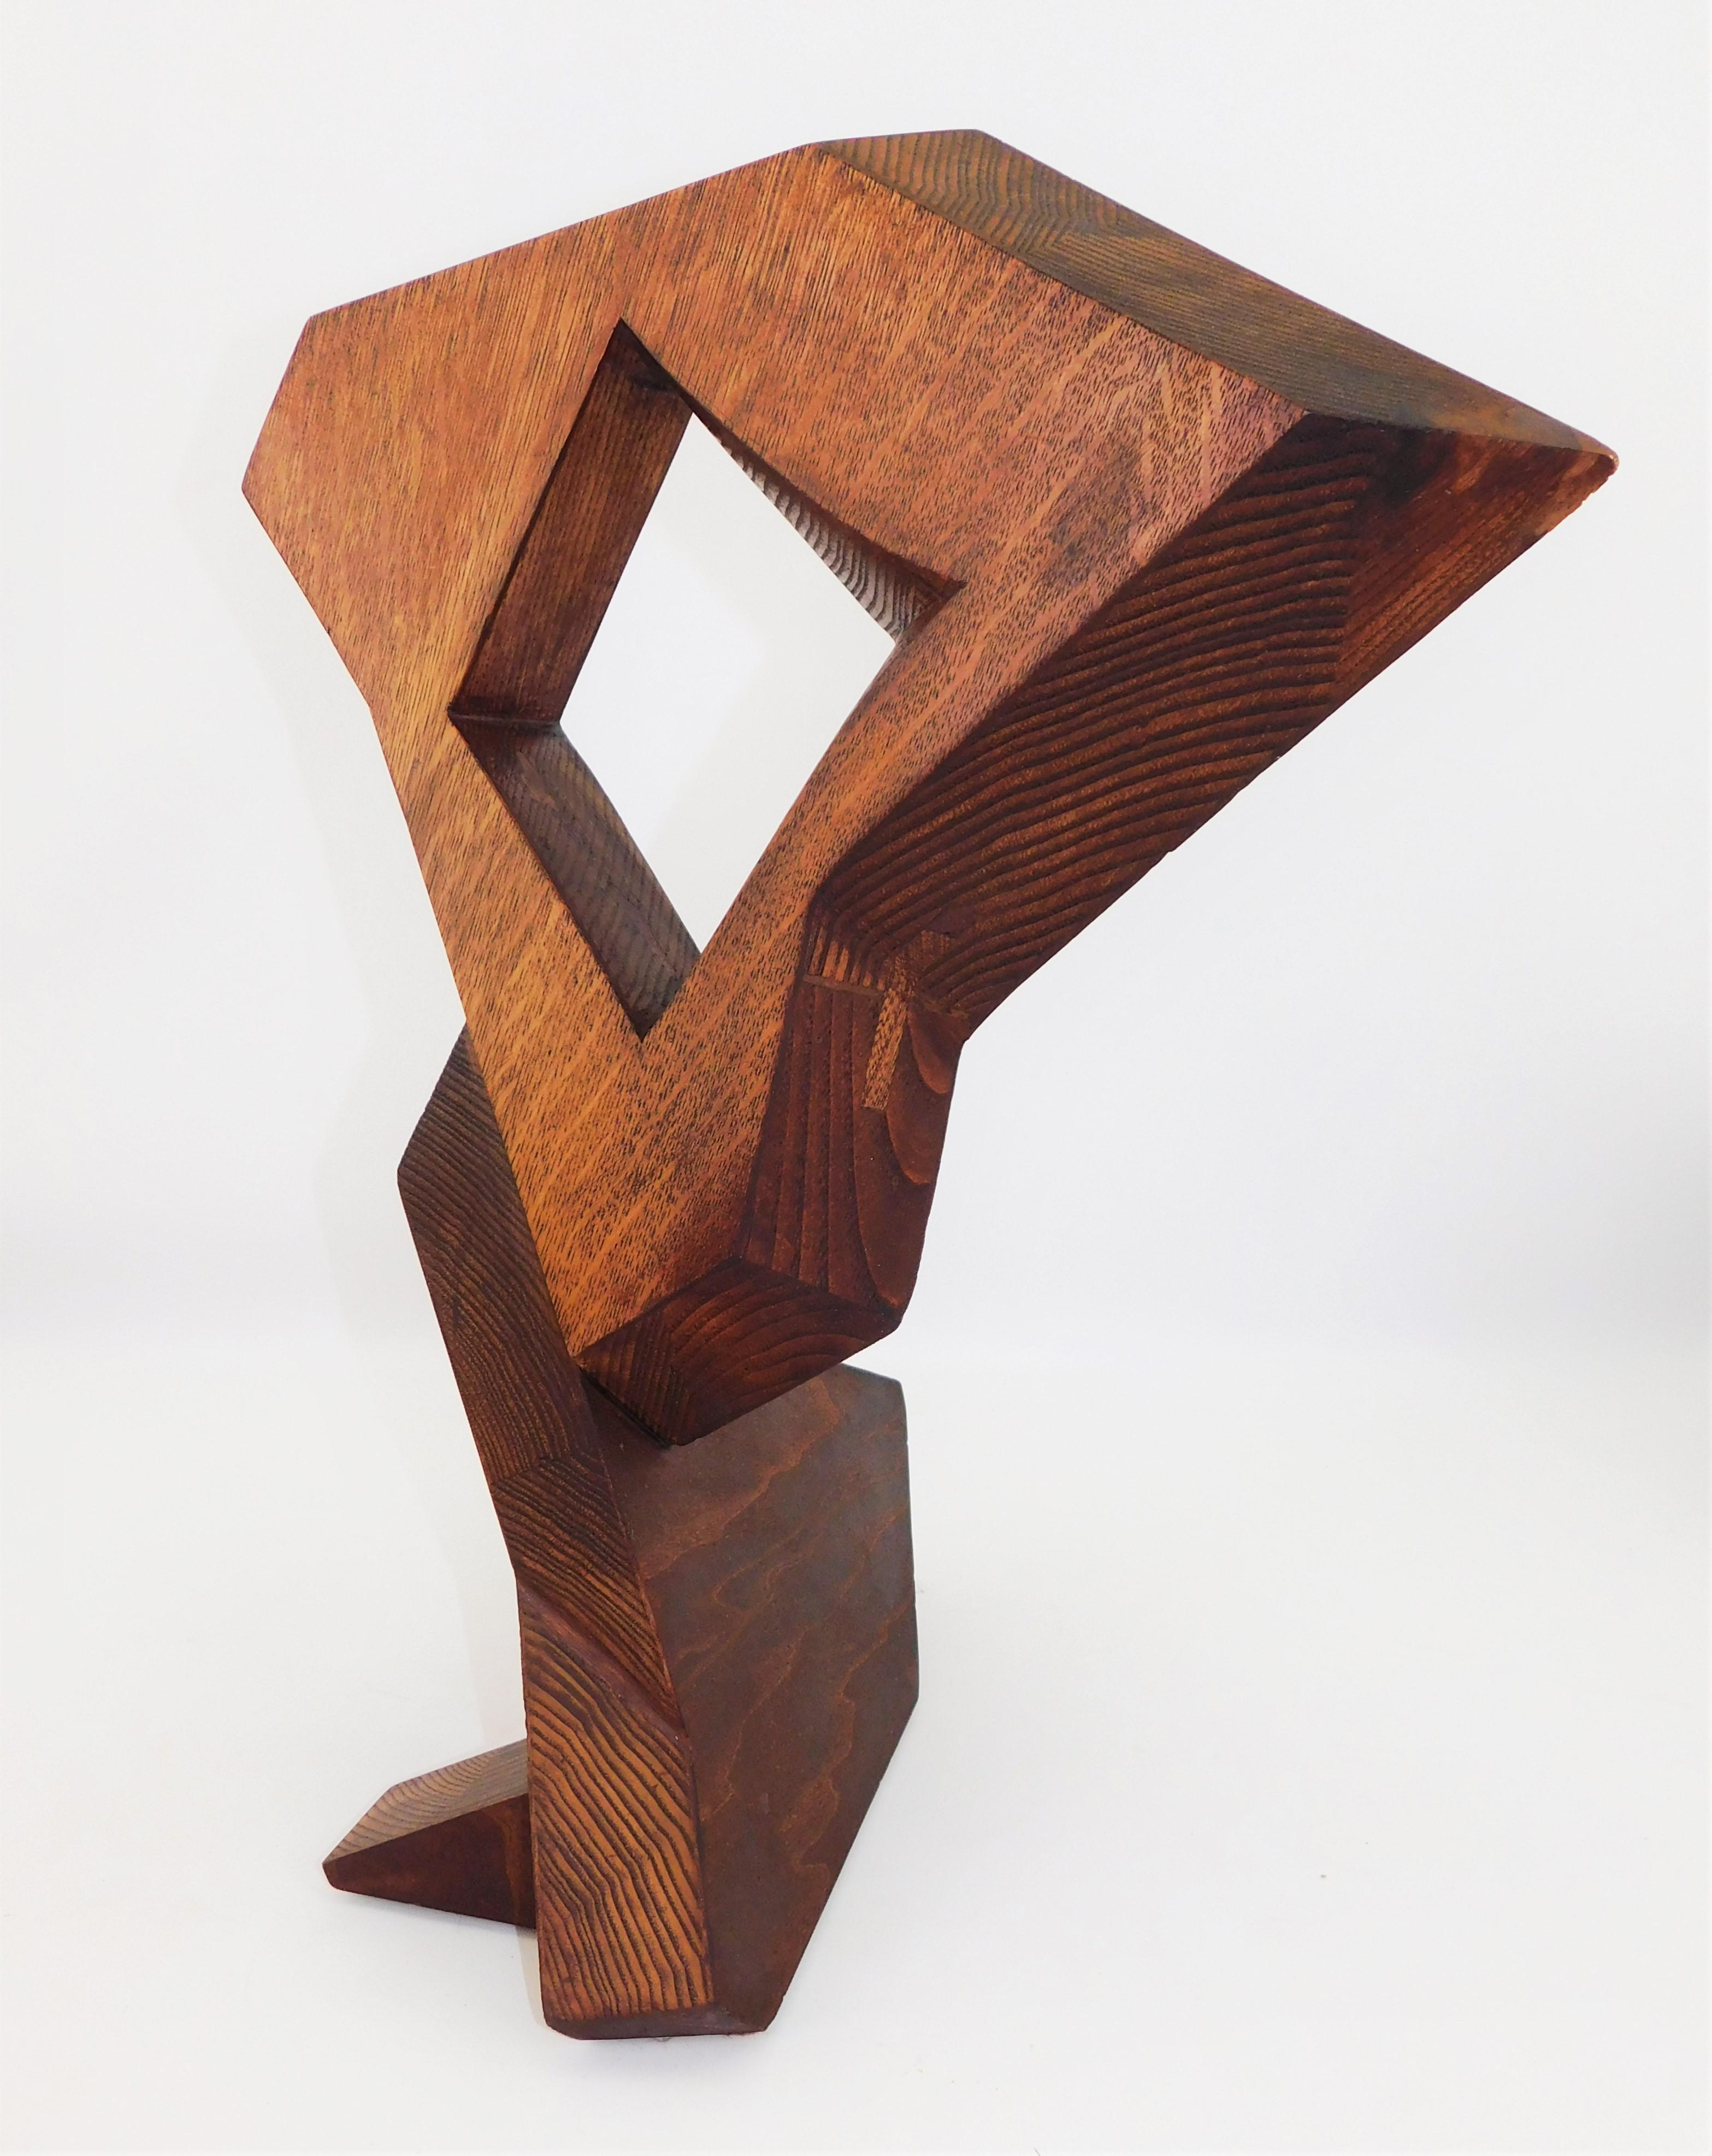 This contemporary abstract wooden sculpture was done by Czeslaw Budny a Polish-Canadian artist in the constructivist style circa 2019. This sculpture was made entirely of up-cycled, reclaimed wood from a variety of sources and utilizes the